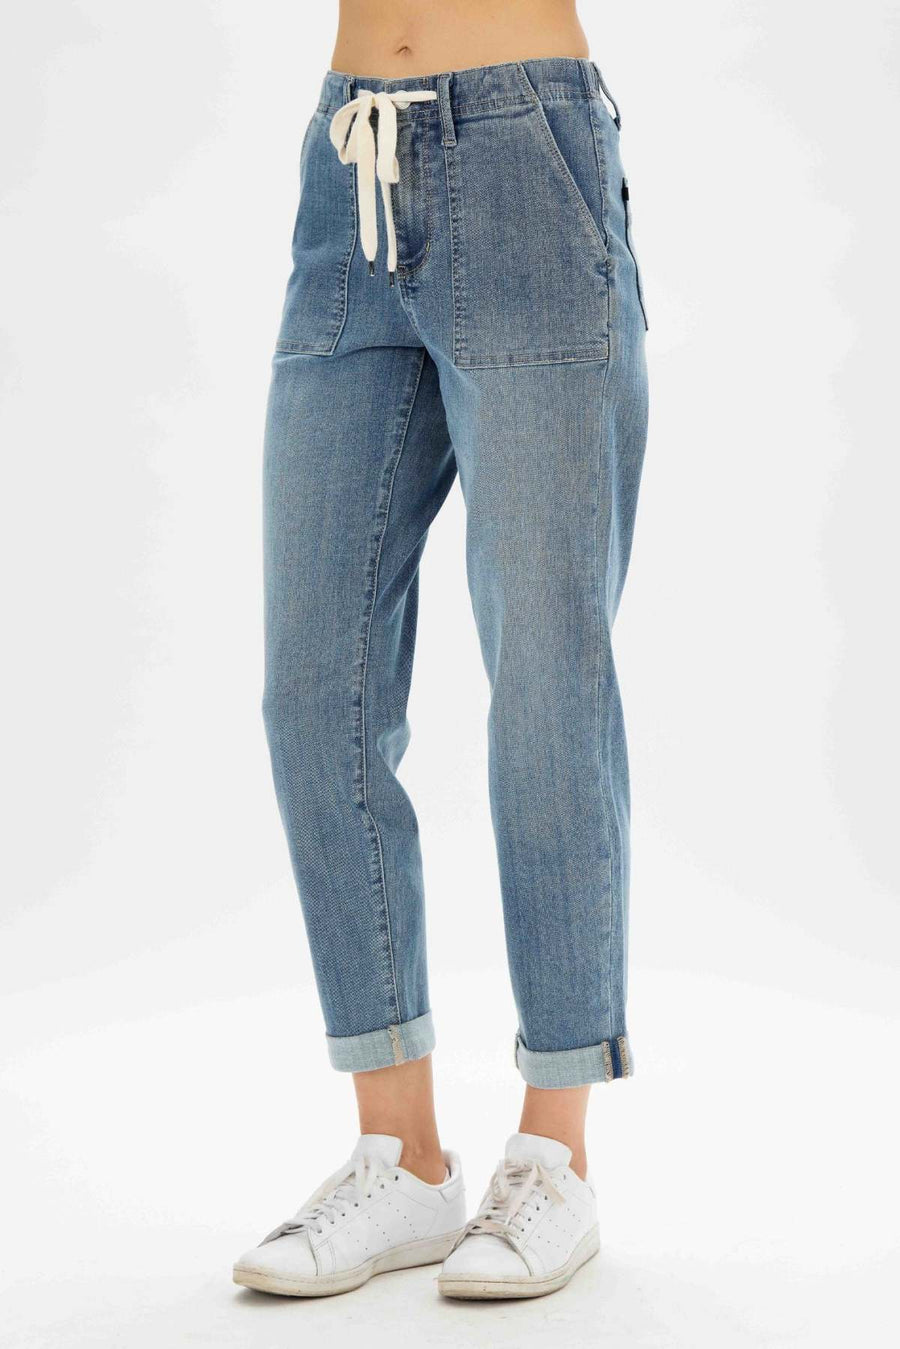 Women's Knitted Jogger Jeans in Mid Wash | Postie